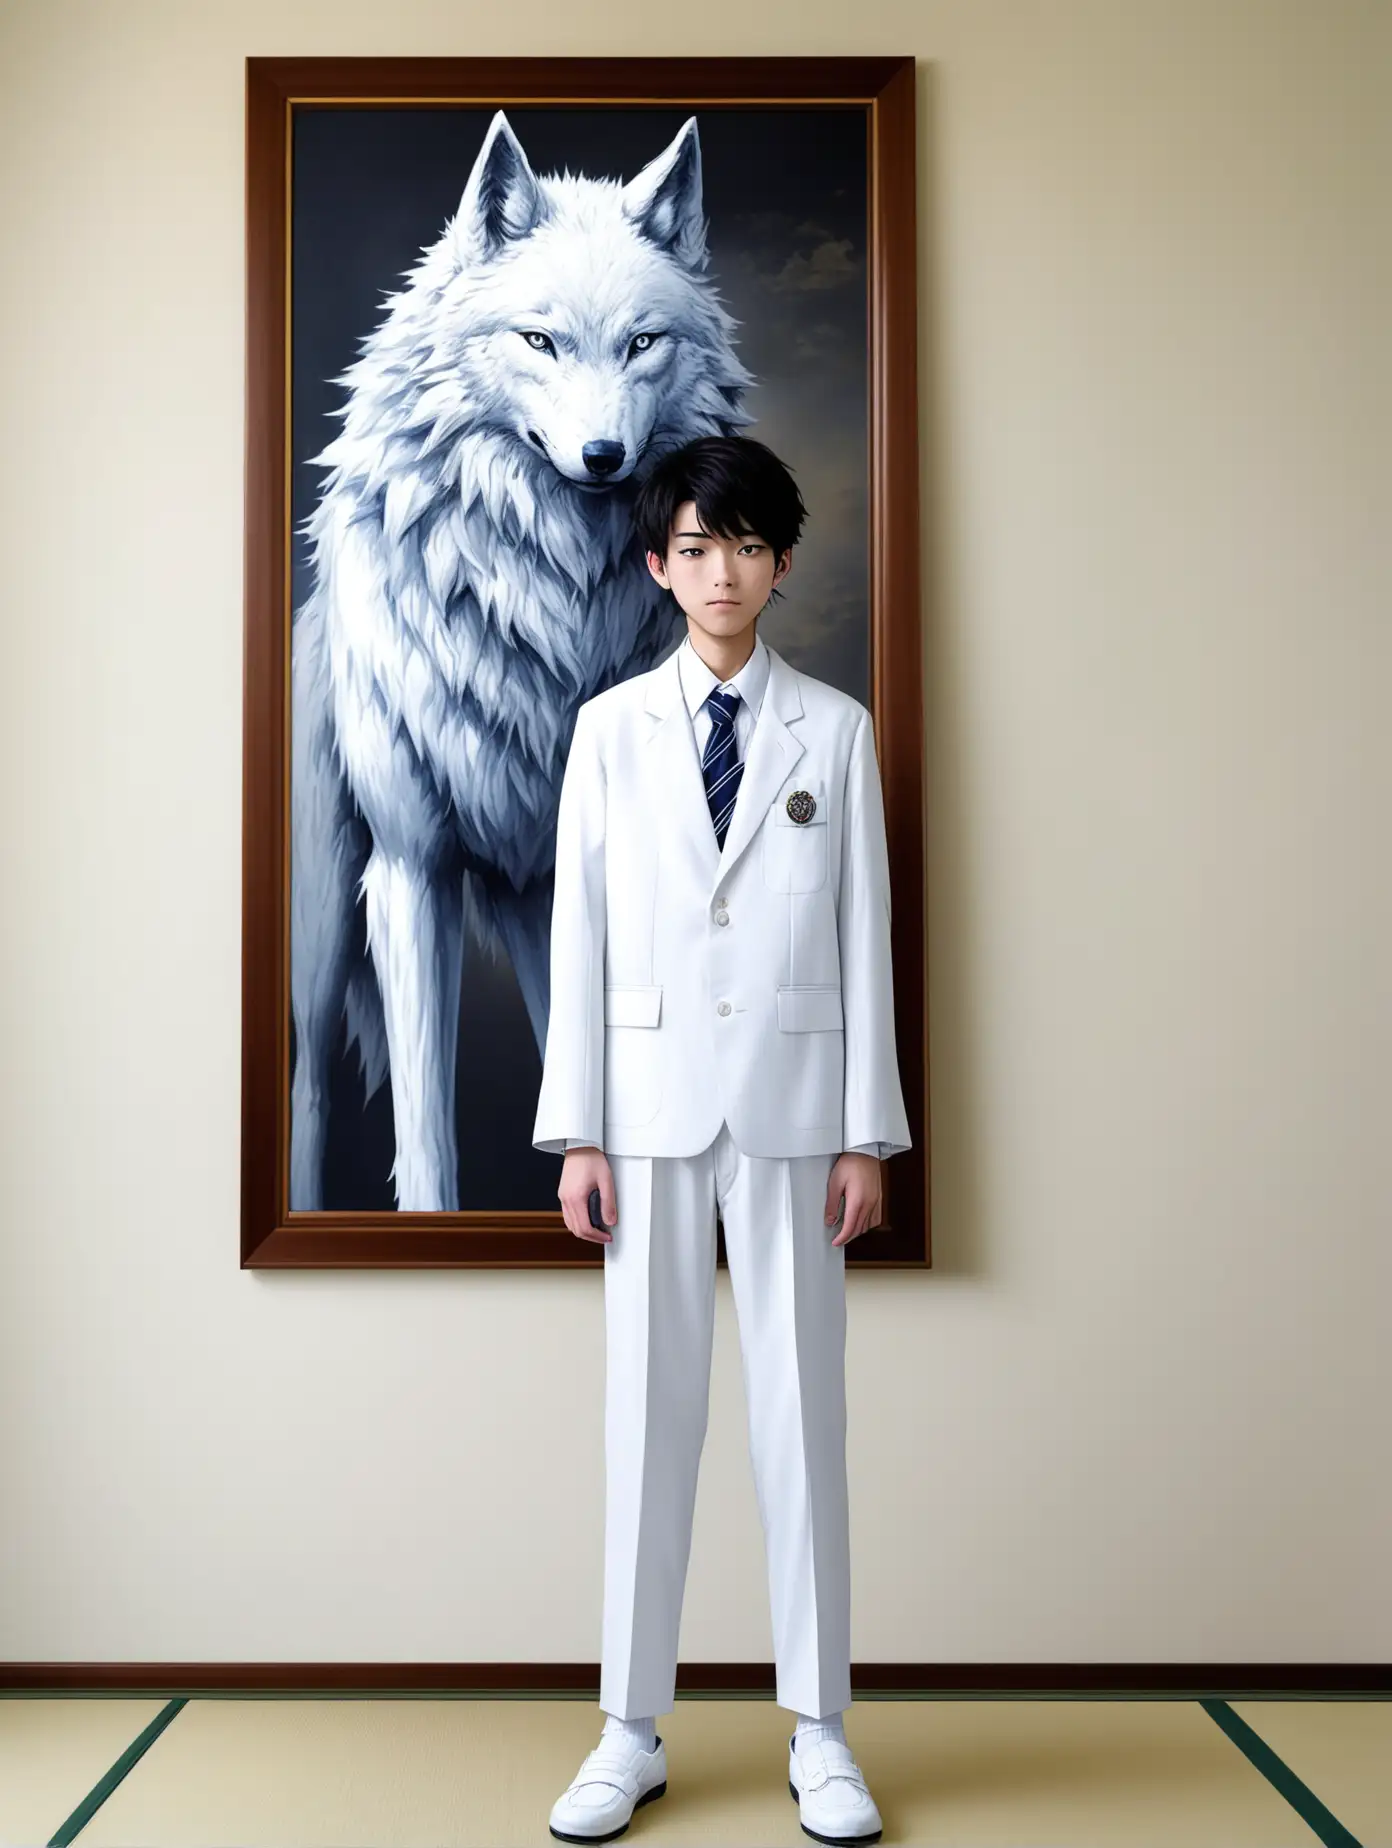 a 16 year old Japanese man wearing a white school uniform, trousers and white shoes, standing in a white palace with a picture of a white wolf